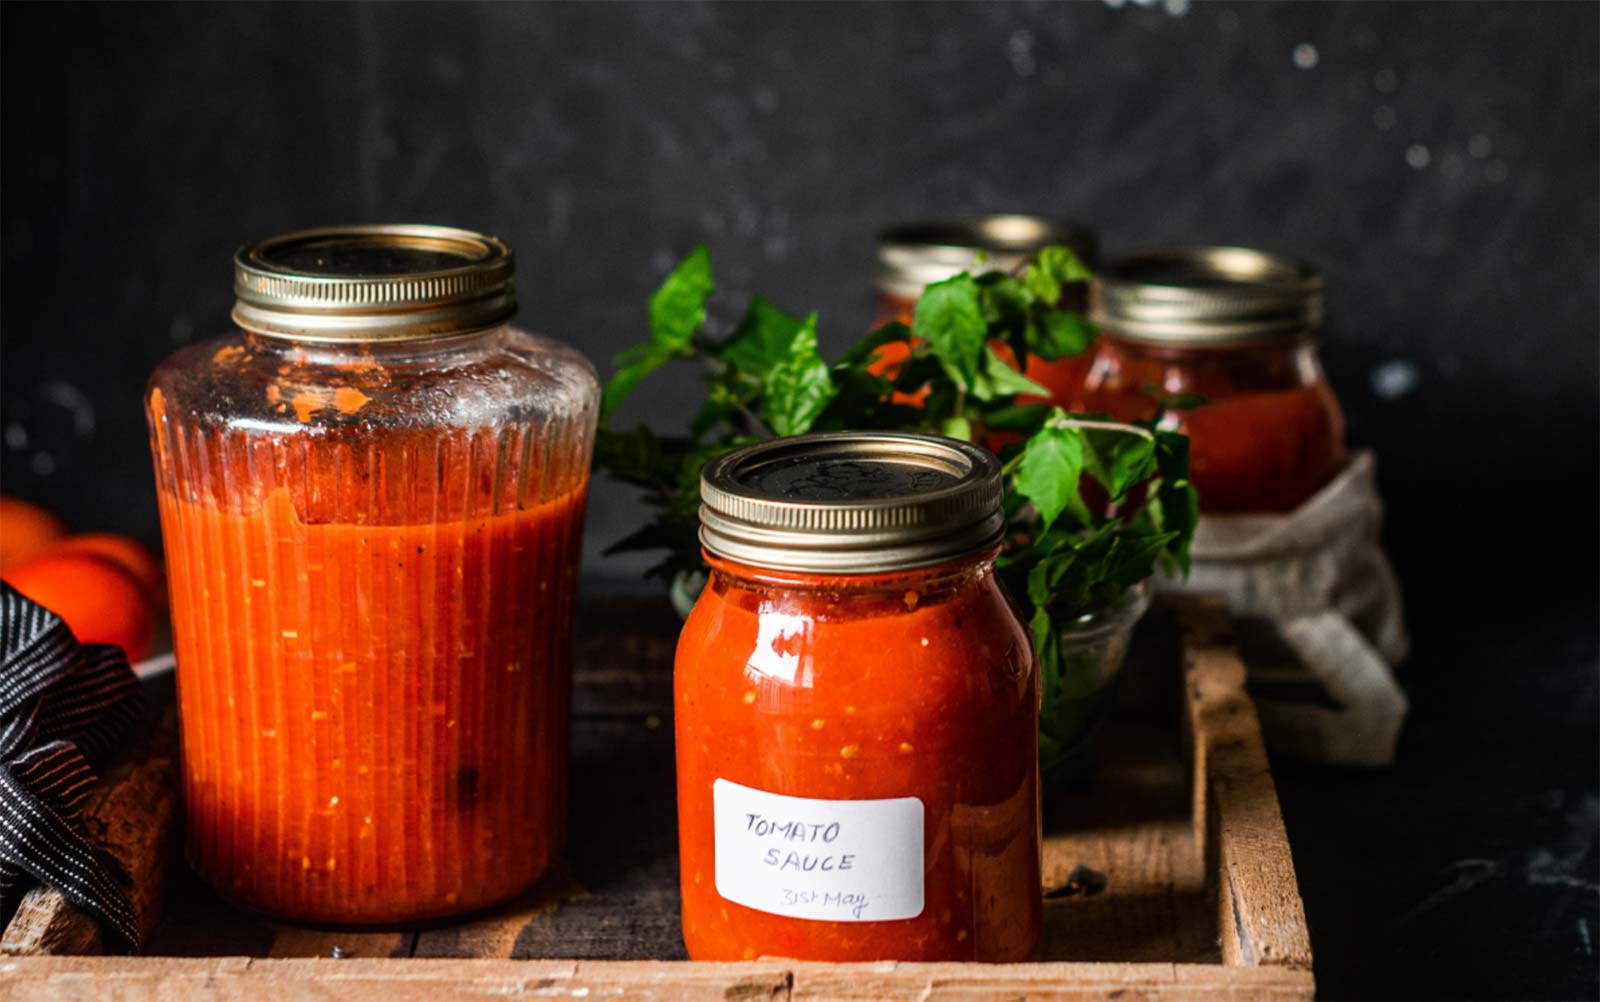 store-bought pizza sauce or homemade pizza sauce